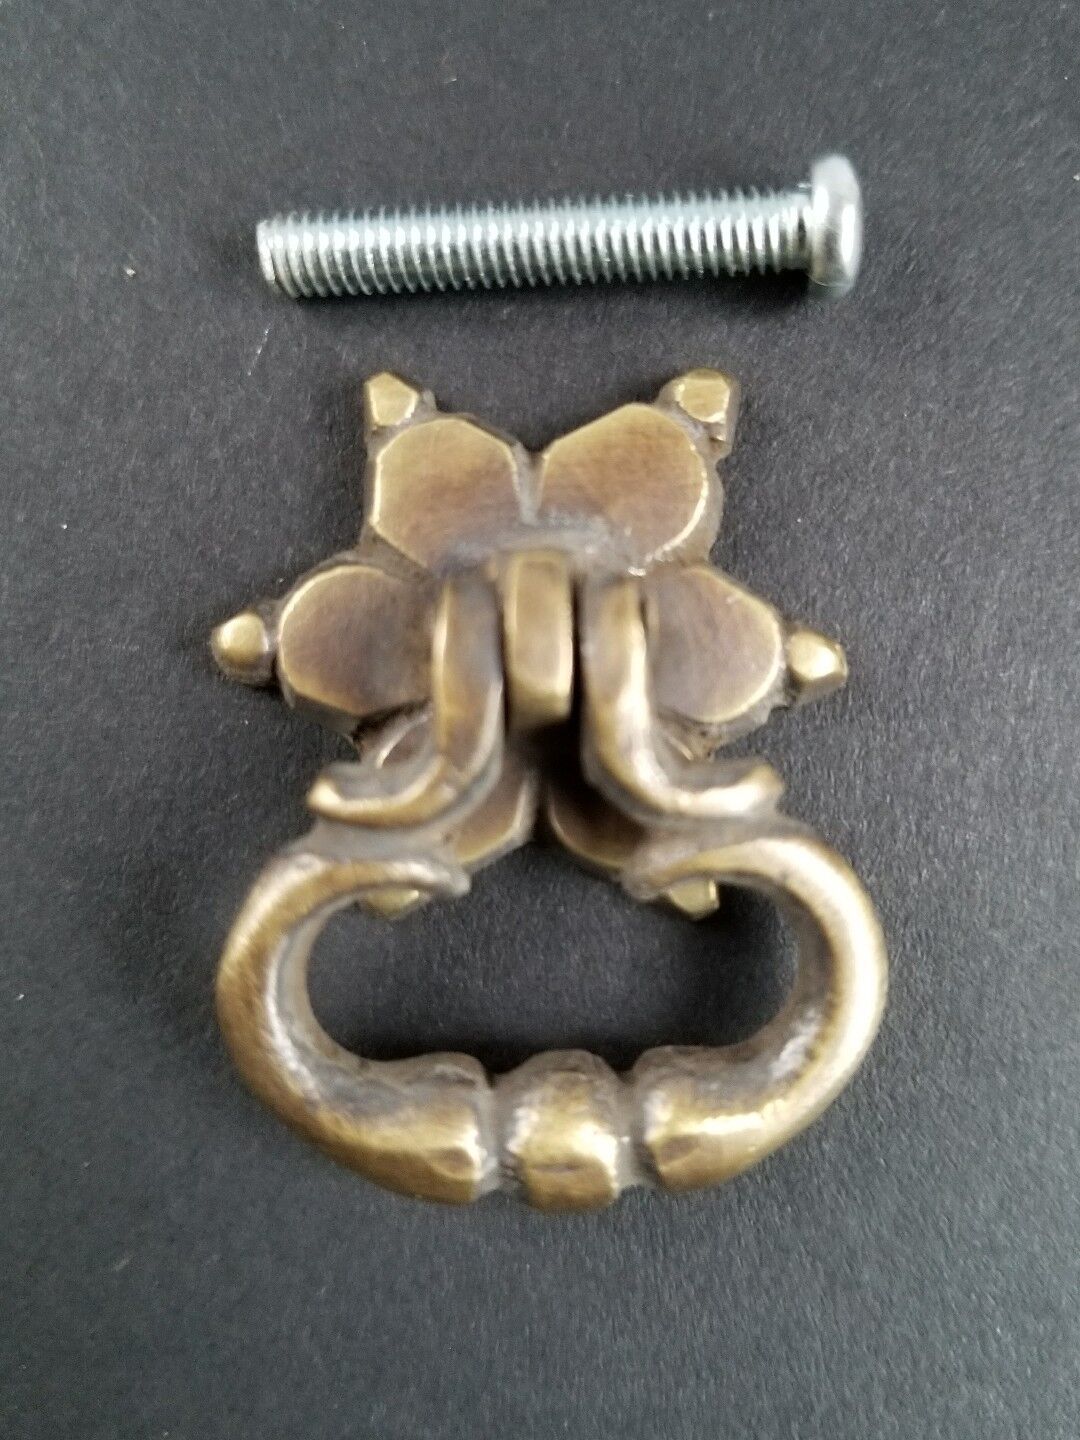 2 x Small Brass Handle Pulls, Ornate Drop Ring,  Rosette Backplate 1-1/4" #H14